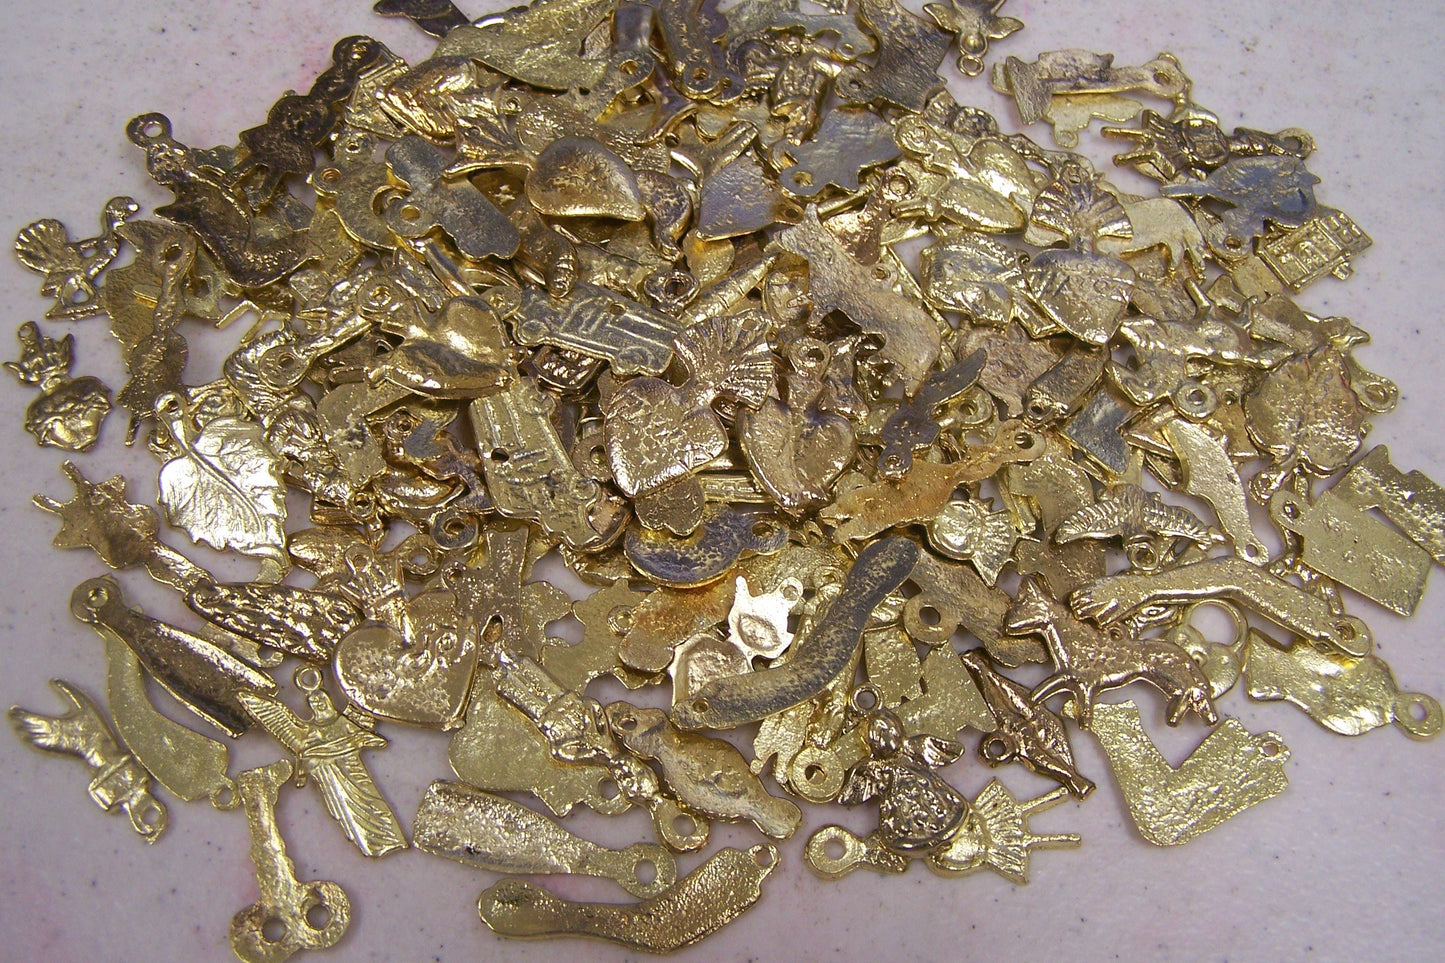 Lot of 25 Different Shiny Golden-Colored Milagros, Mexico